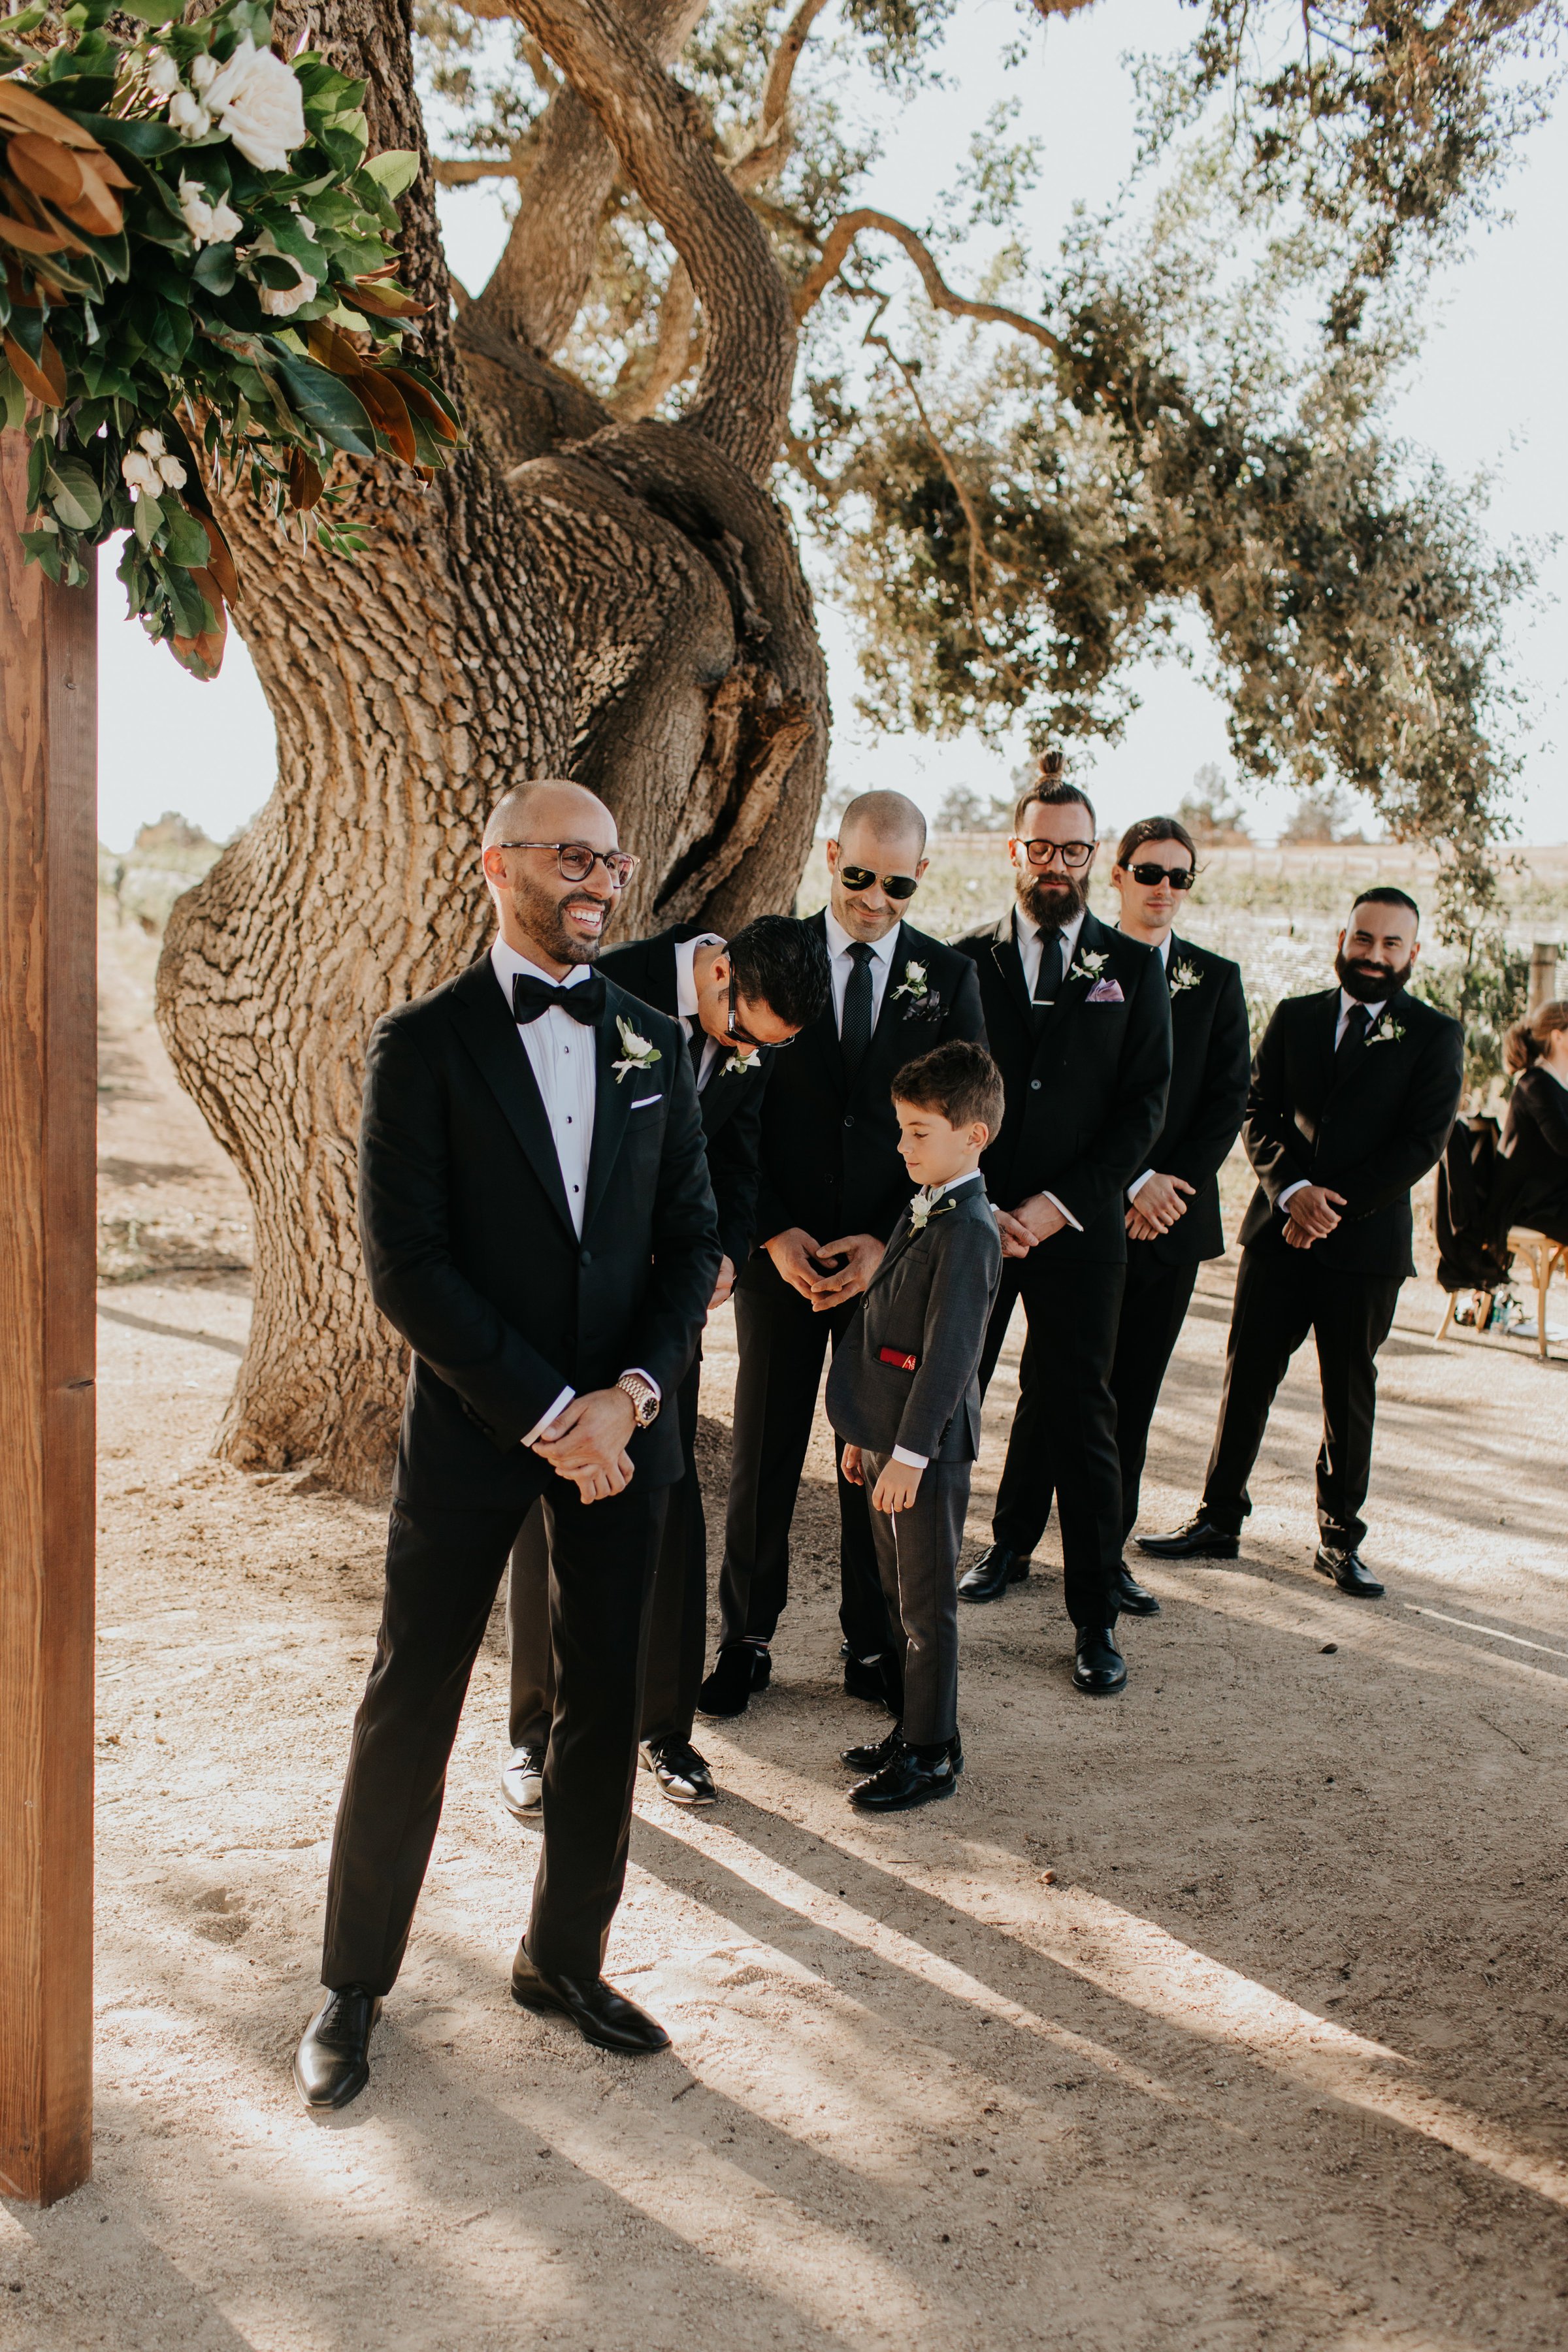 www.santabarbarawedding.com | Alexandria Monette Photography | Sunstone Villa | Soleil Events | Anna le Pley Taylor Flowers | Town and Country Event Rentals | Groom and Groomsmen at Ceremony 